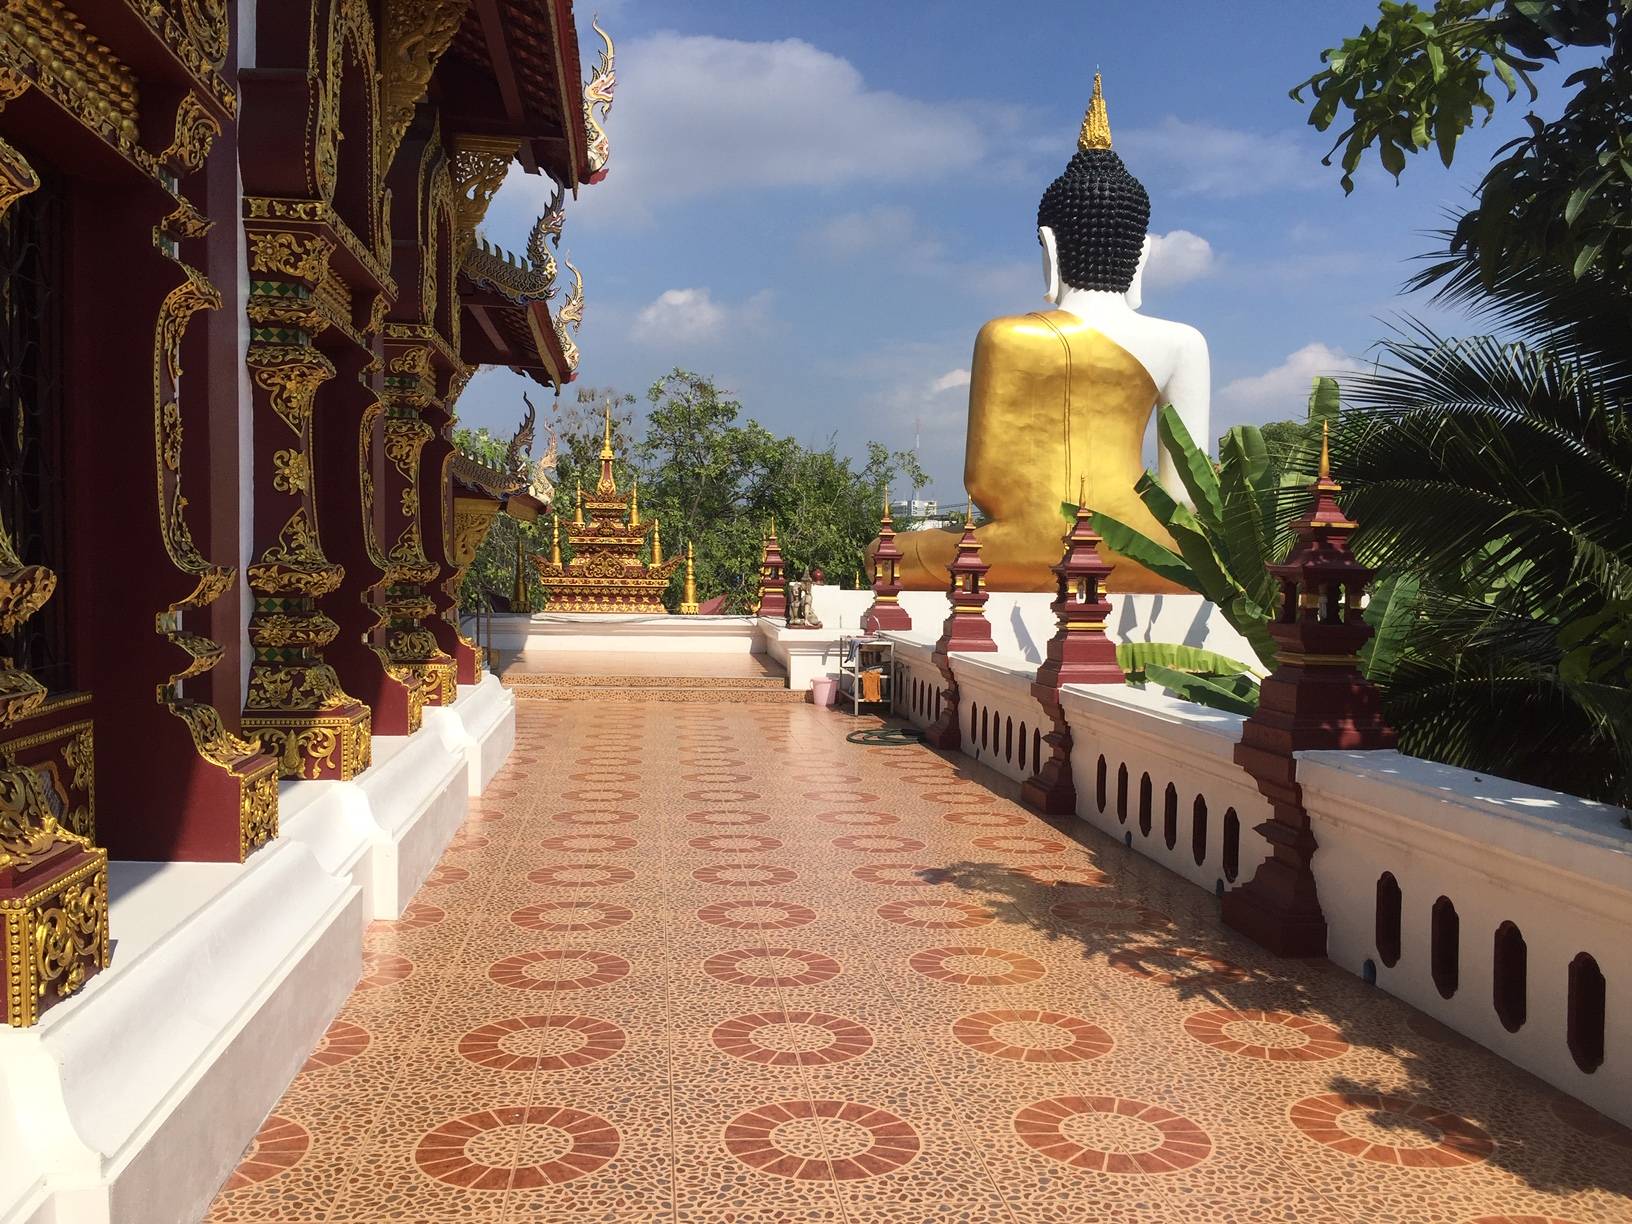 Wat Rajamontean - the dragon temple with a giant Buddha statue